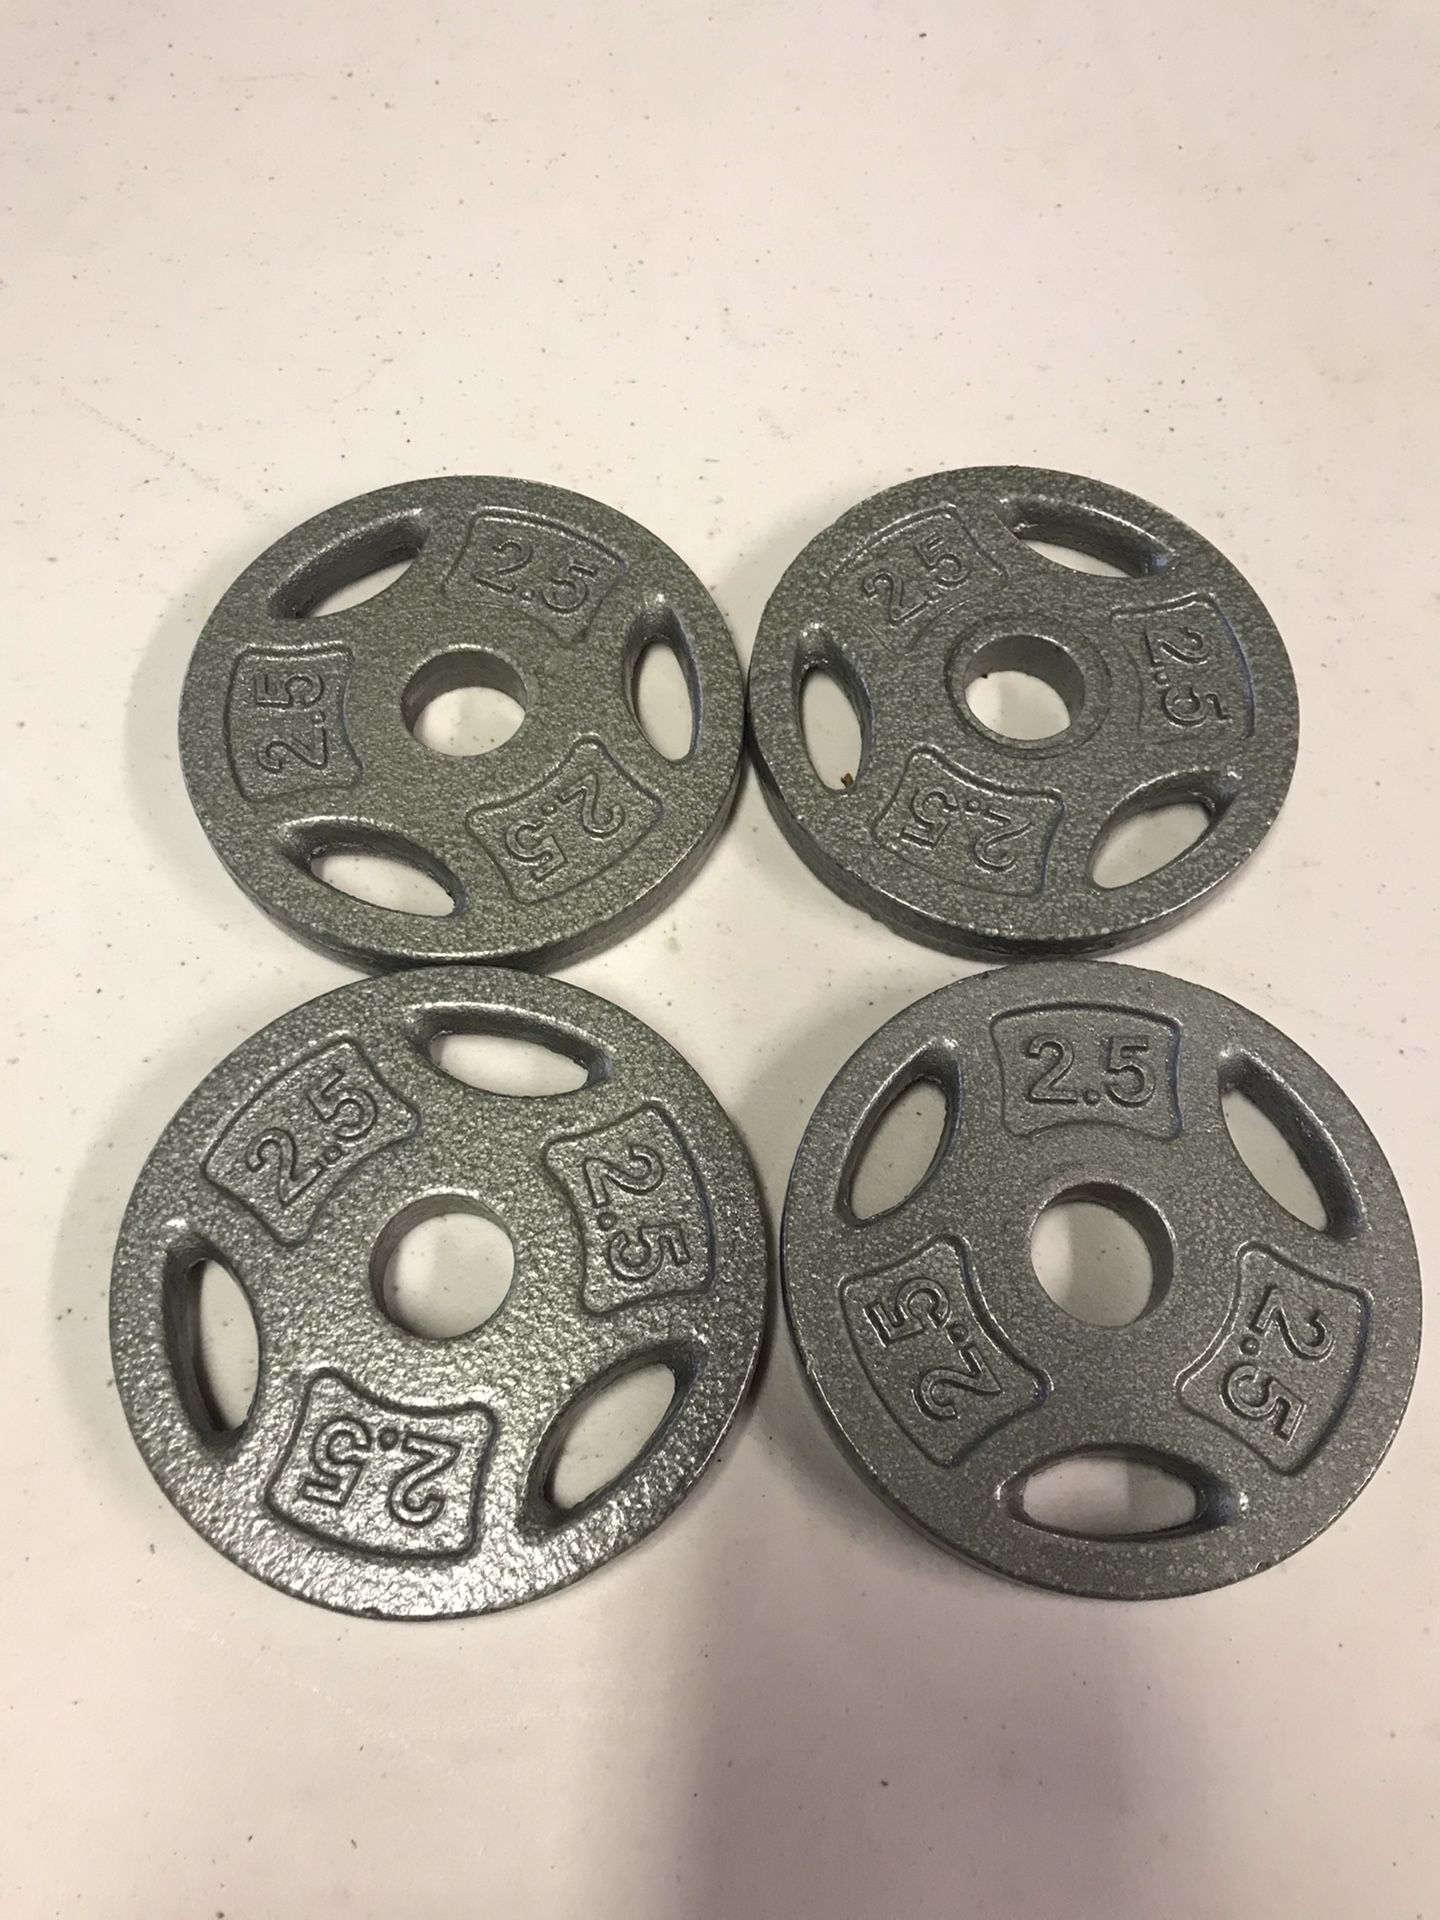 4 Brand New 2 1/2 Lb Weight Plates, 1”